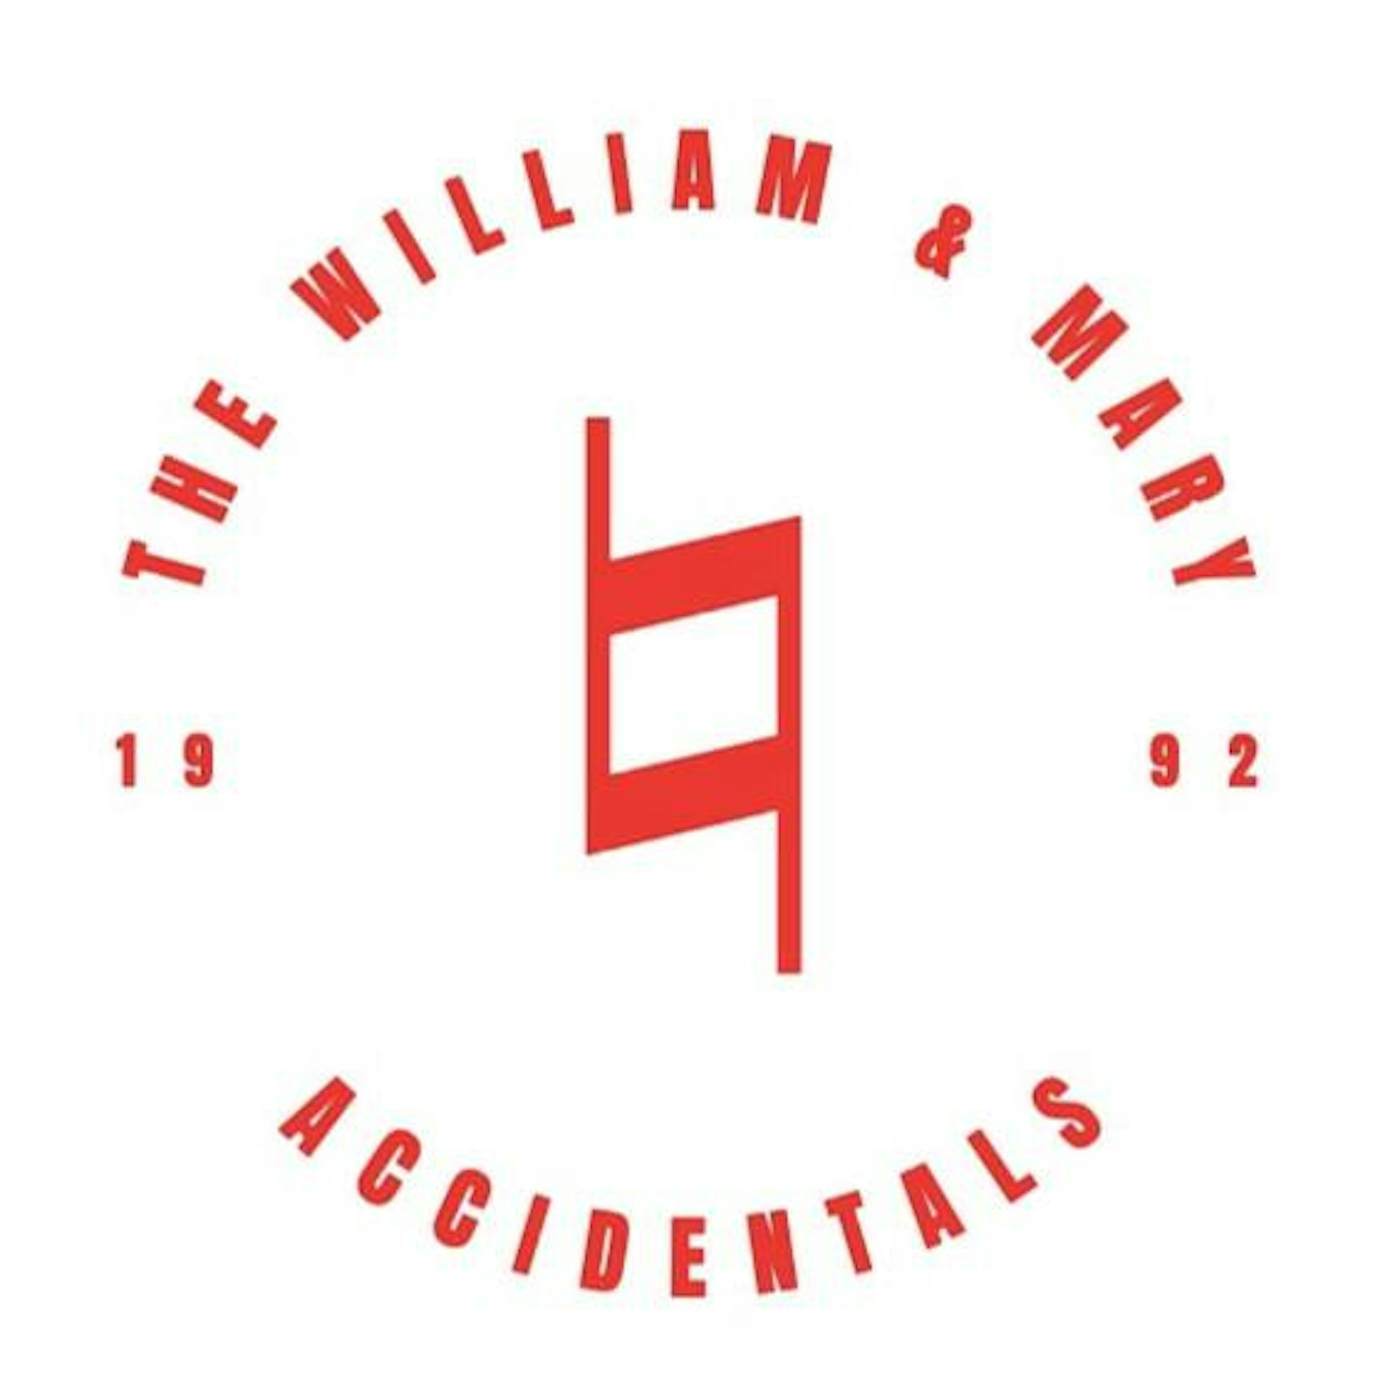 The William & Mary Accidentals